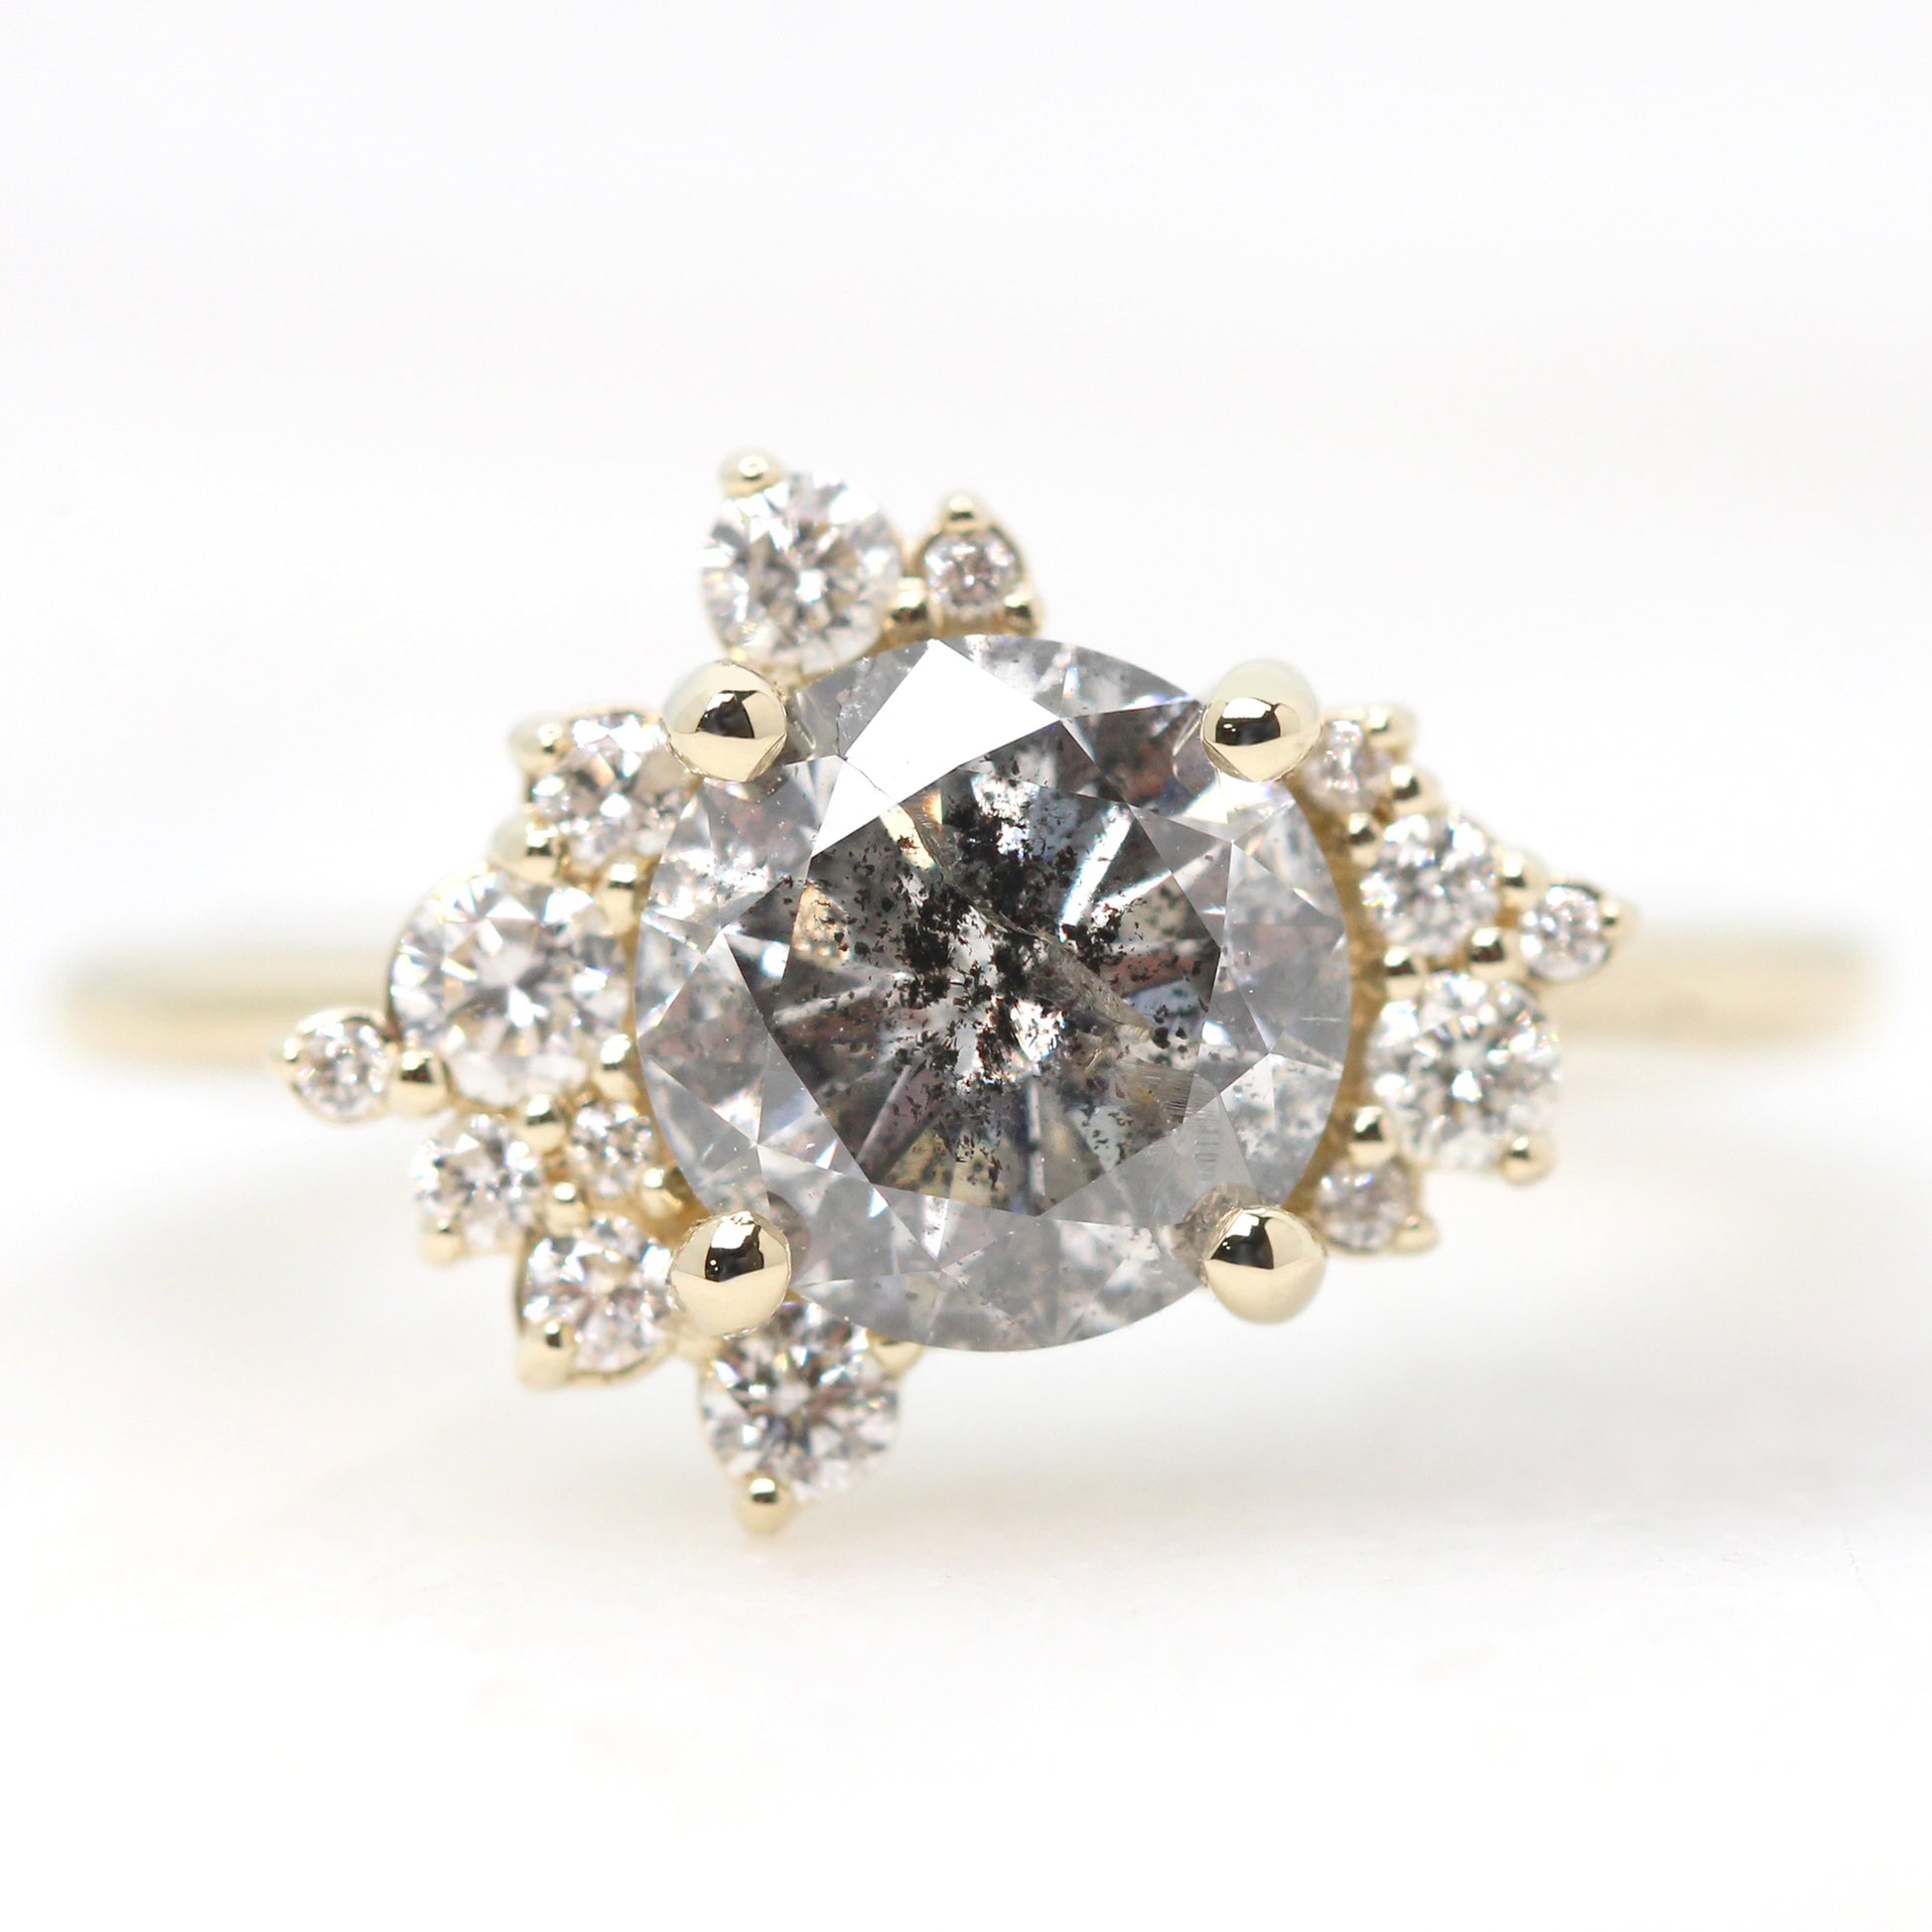 Orion Ring with a 1.61 Carat Round Dark Gray Celestial Diamond and White Accent Diamonds in 14k Yellow Gold - Ready to Size and Ship - Midwinter Co. Alternative Bridal Rings and Modern Fine Jewelry